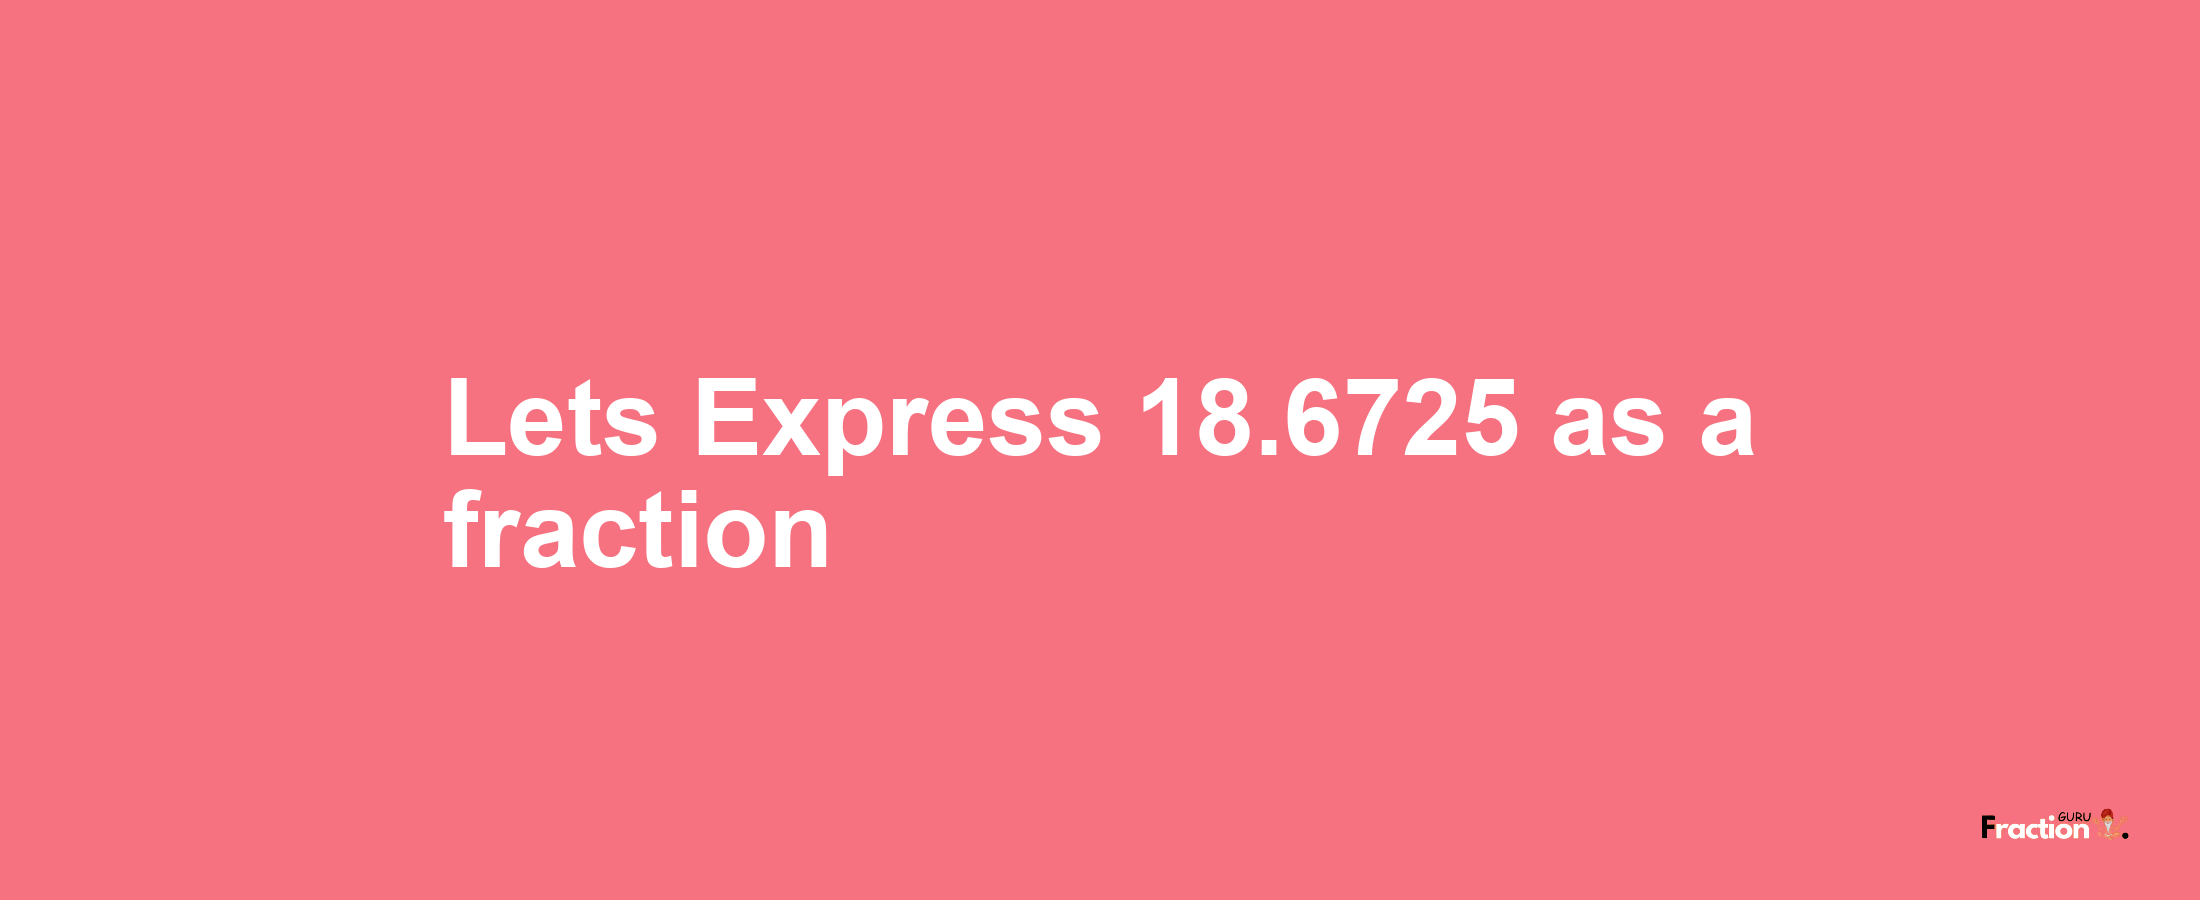 Lets Express 18.6725 as afraction